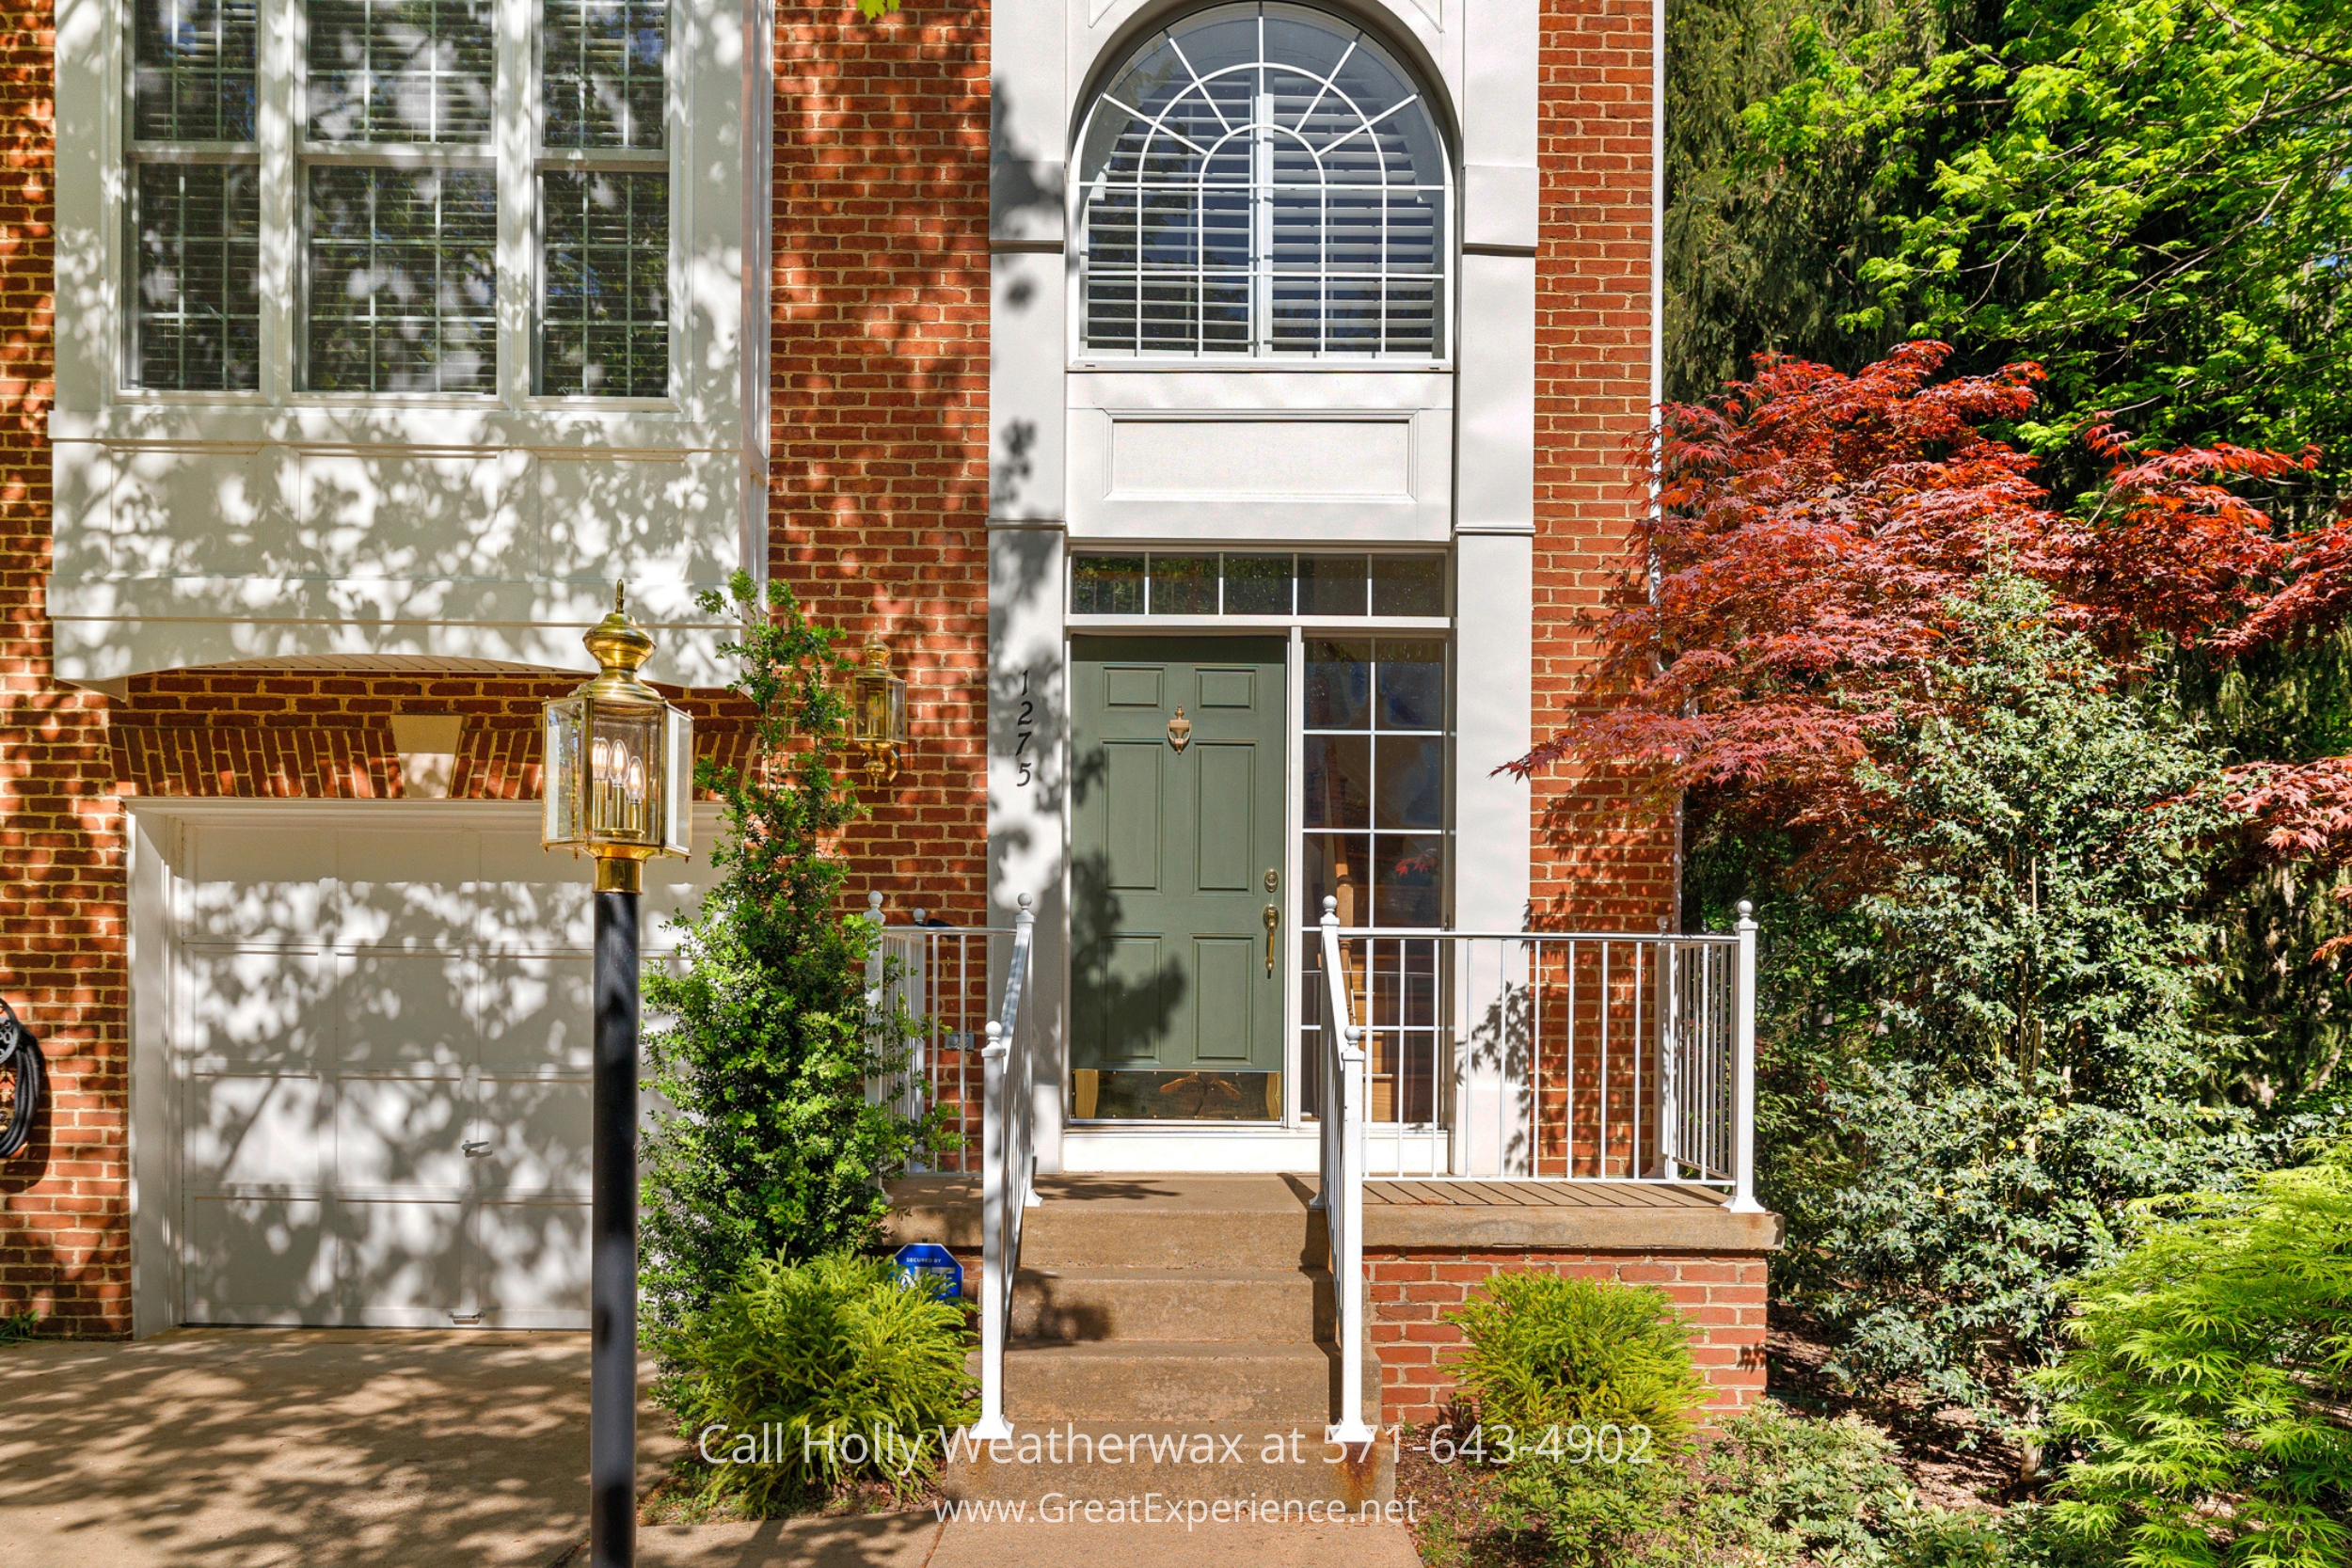 A stunning townhome in the heart of North Virginia.